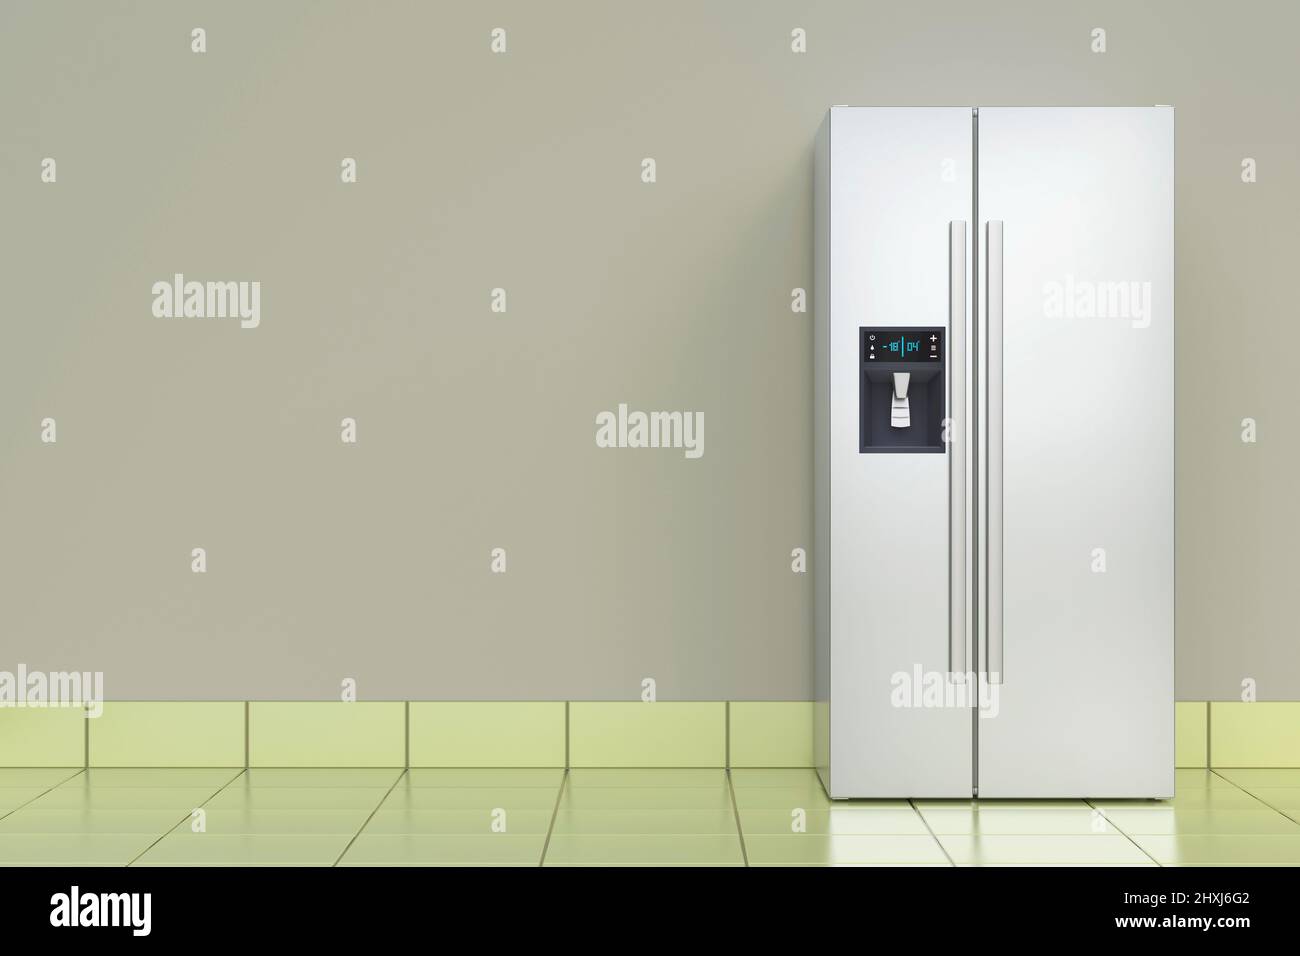 Silver side-by-side refrigerator in the kitchen Stock Photo